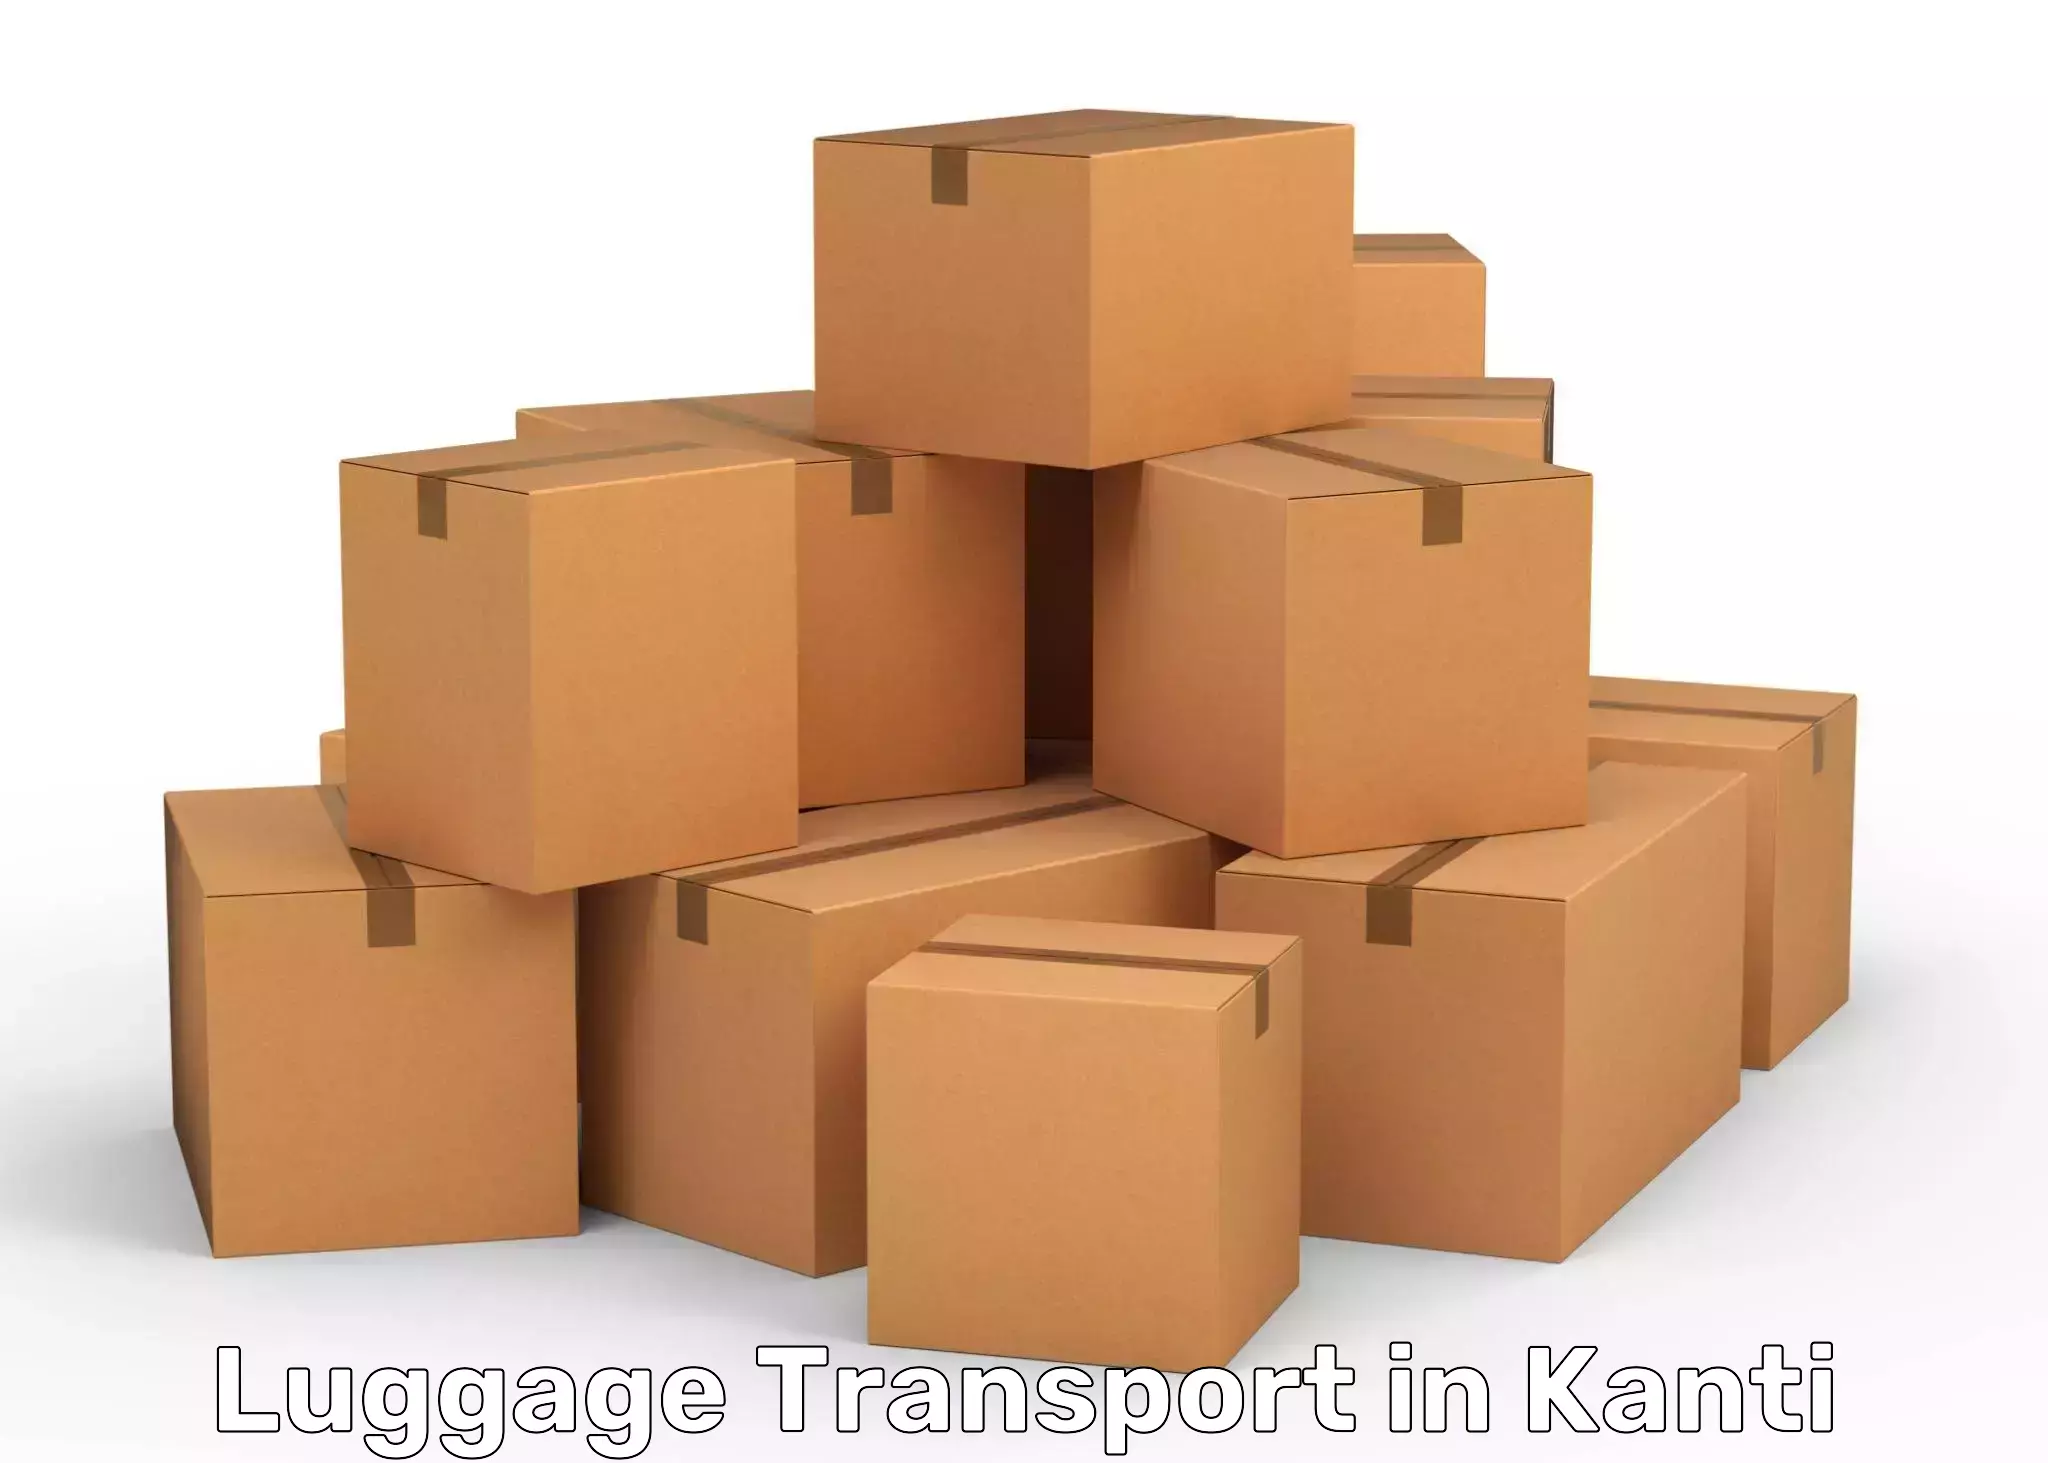 Luggage transport deals in Kanti